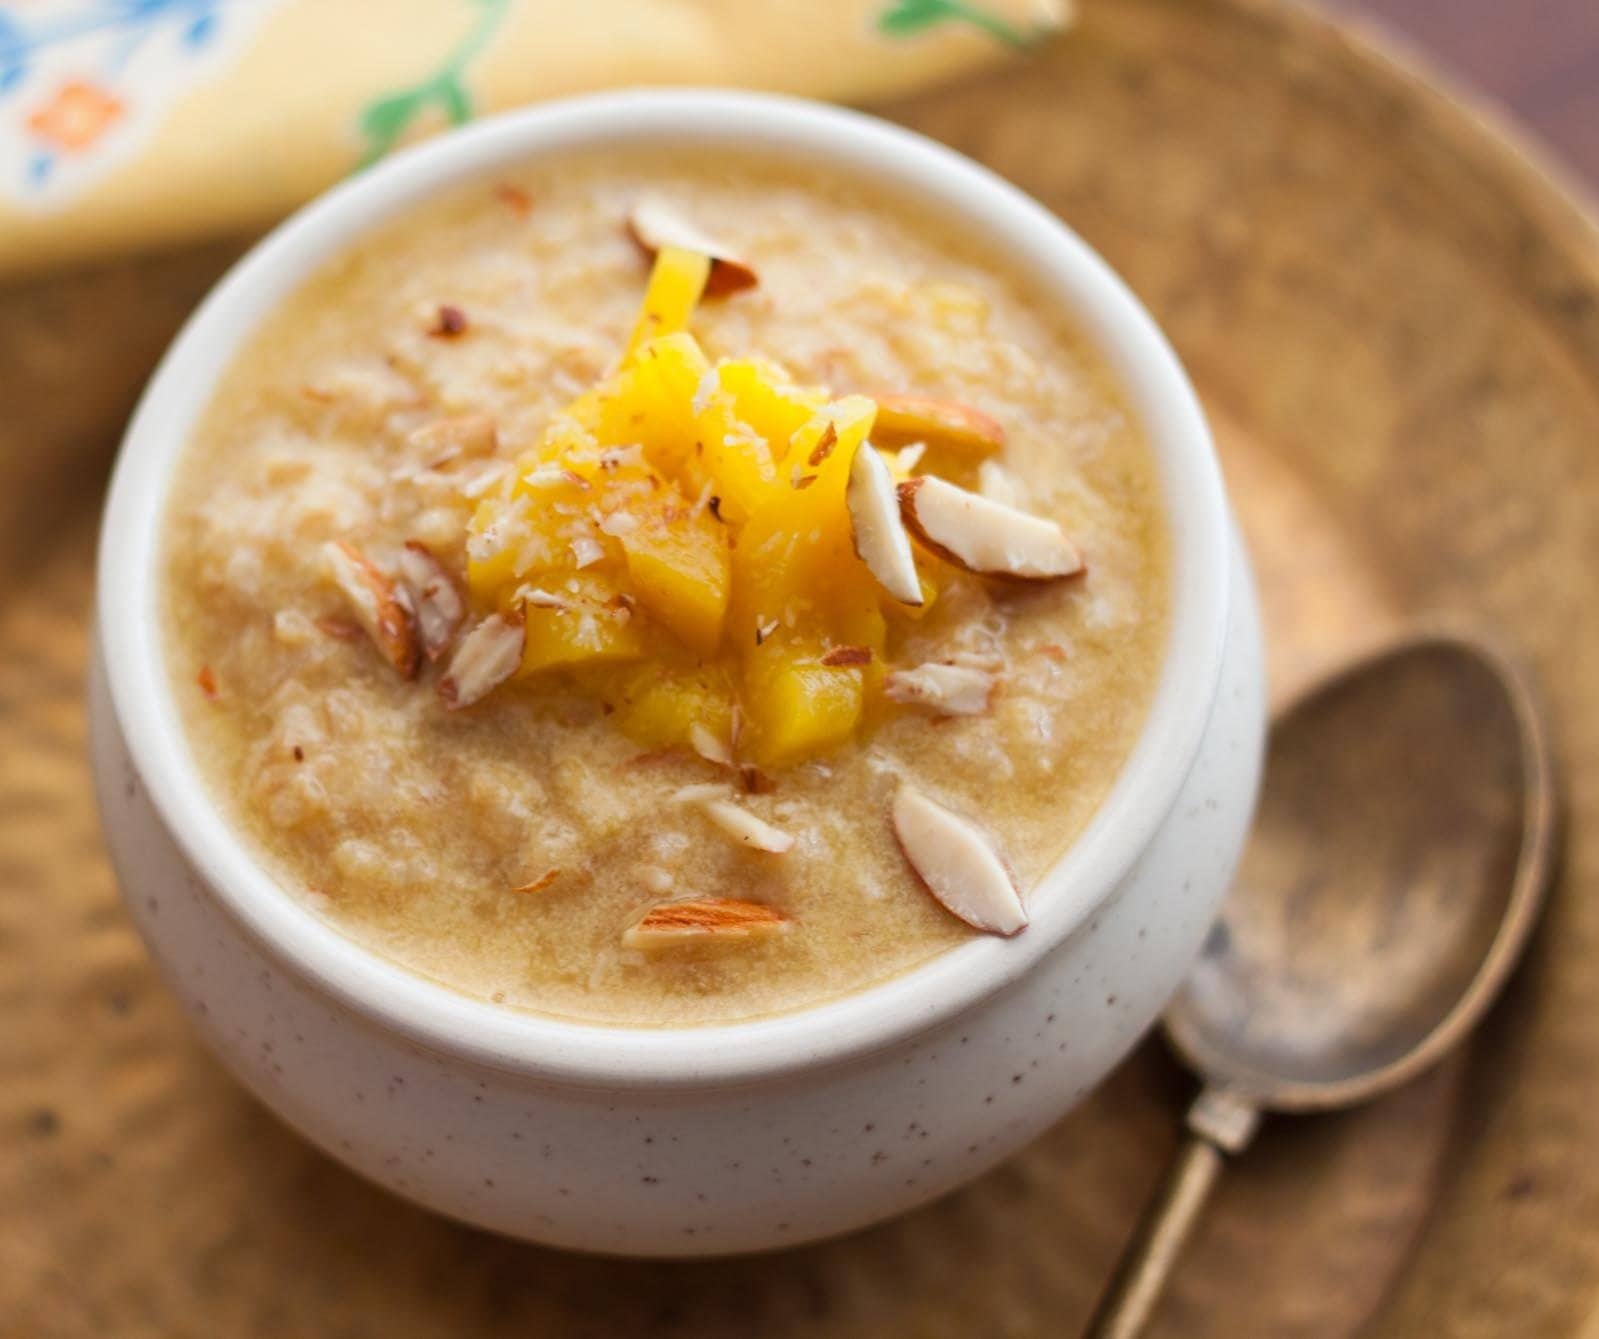 Rice pudding topped with jackfruit and nuts.